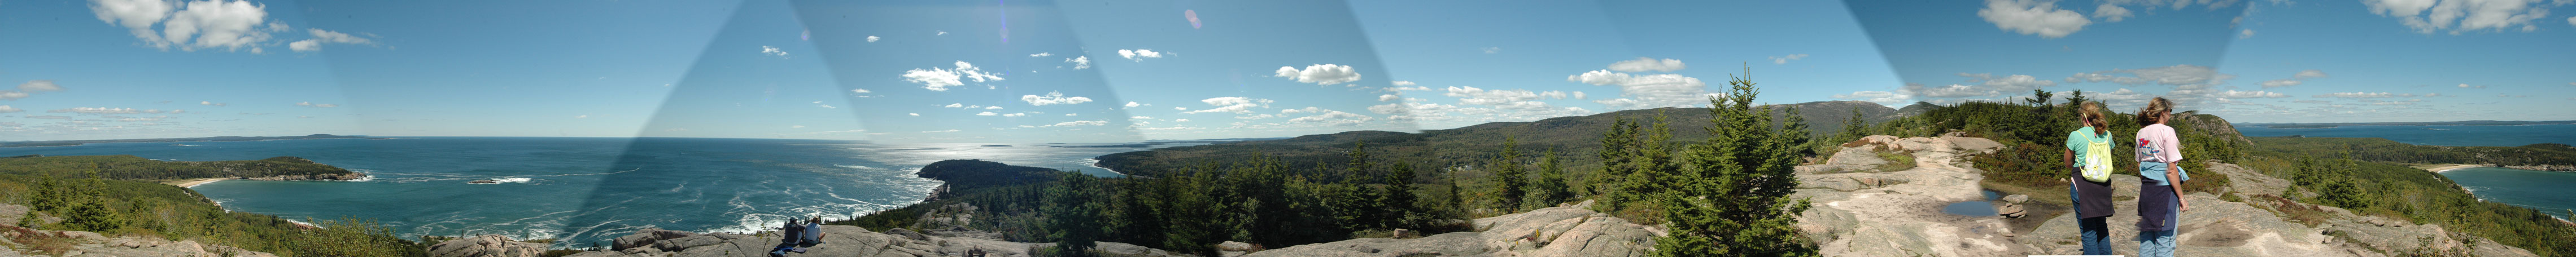 View from Gorham Mtn